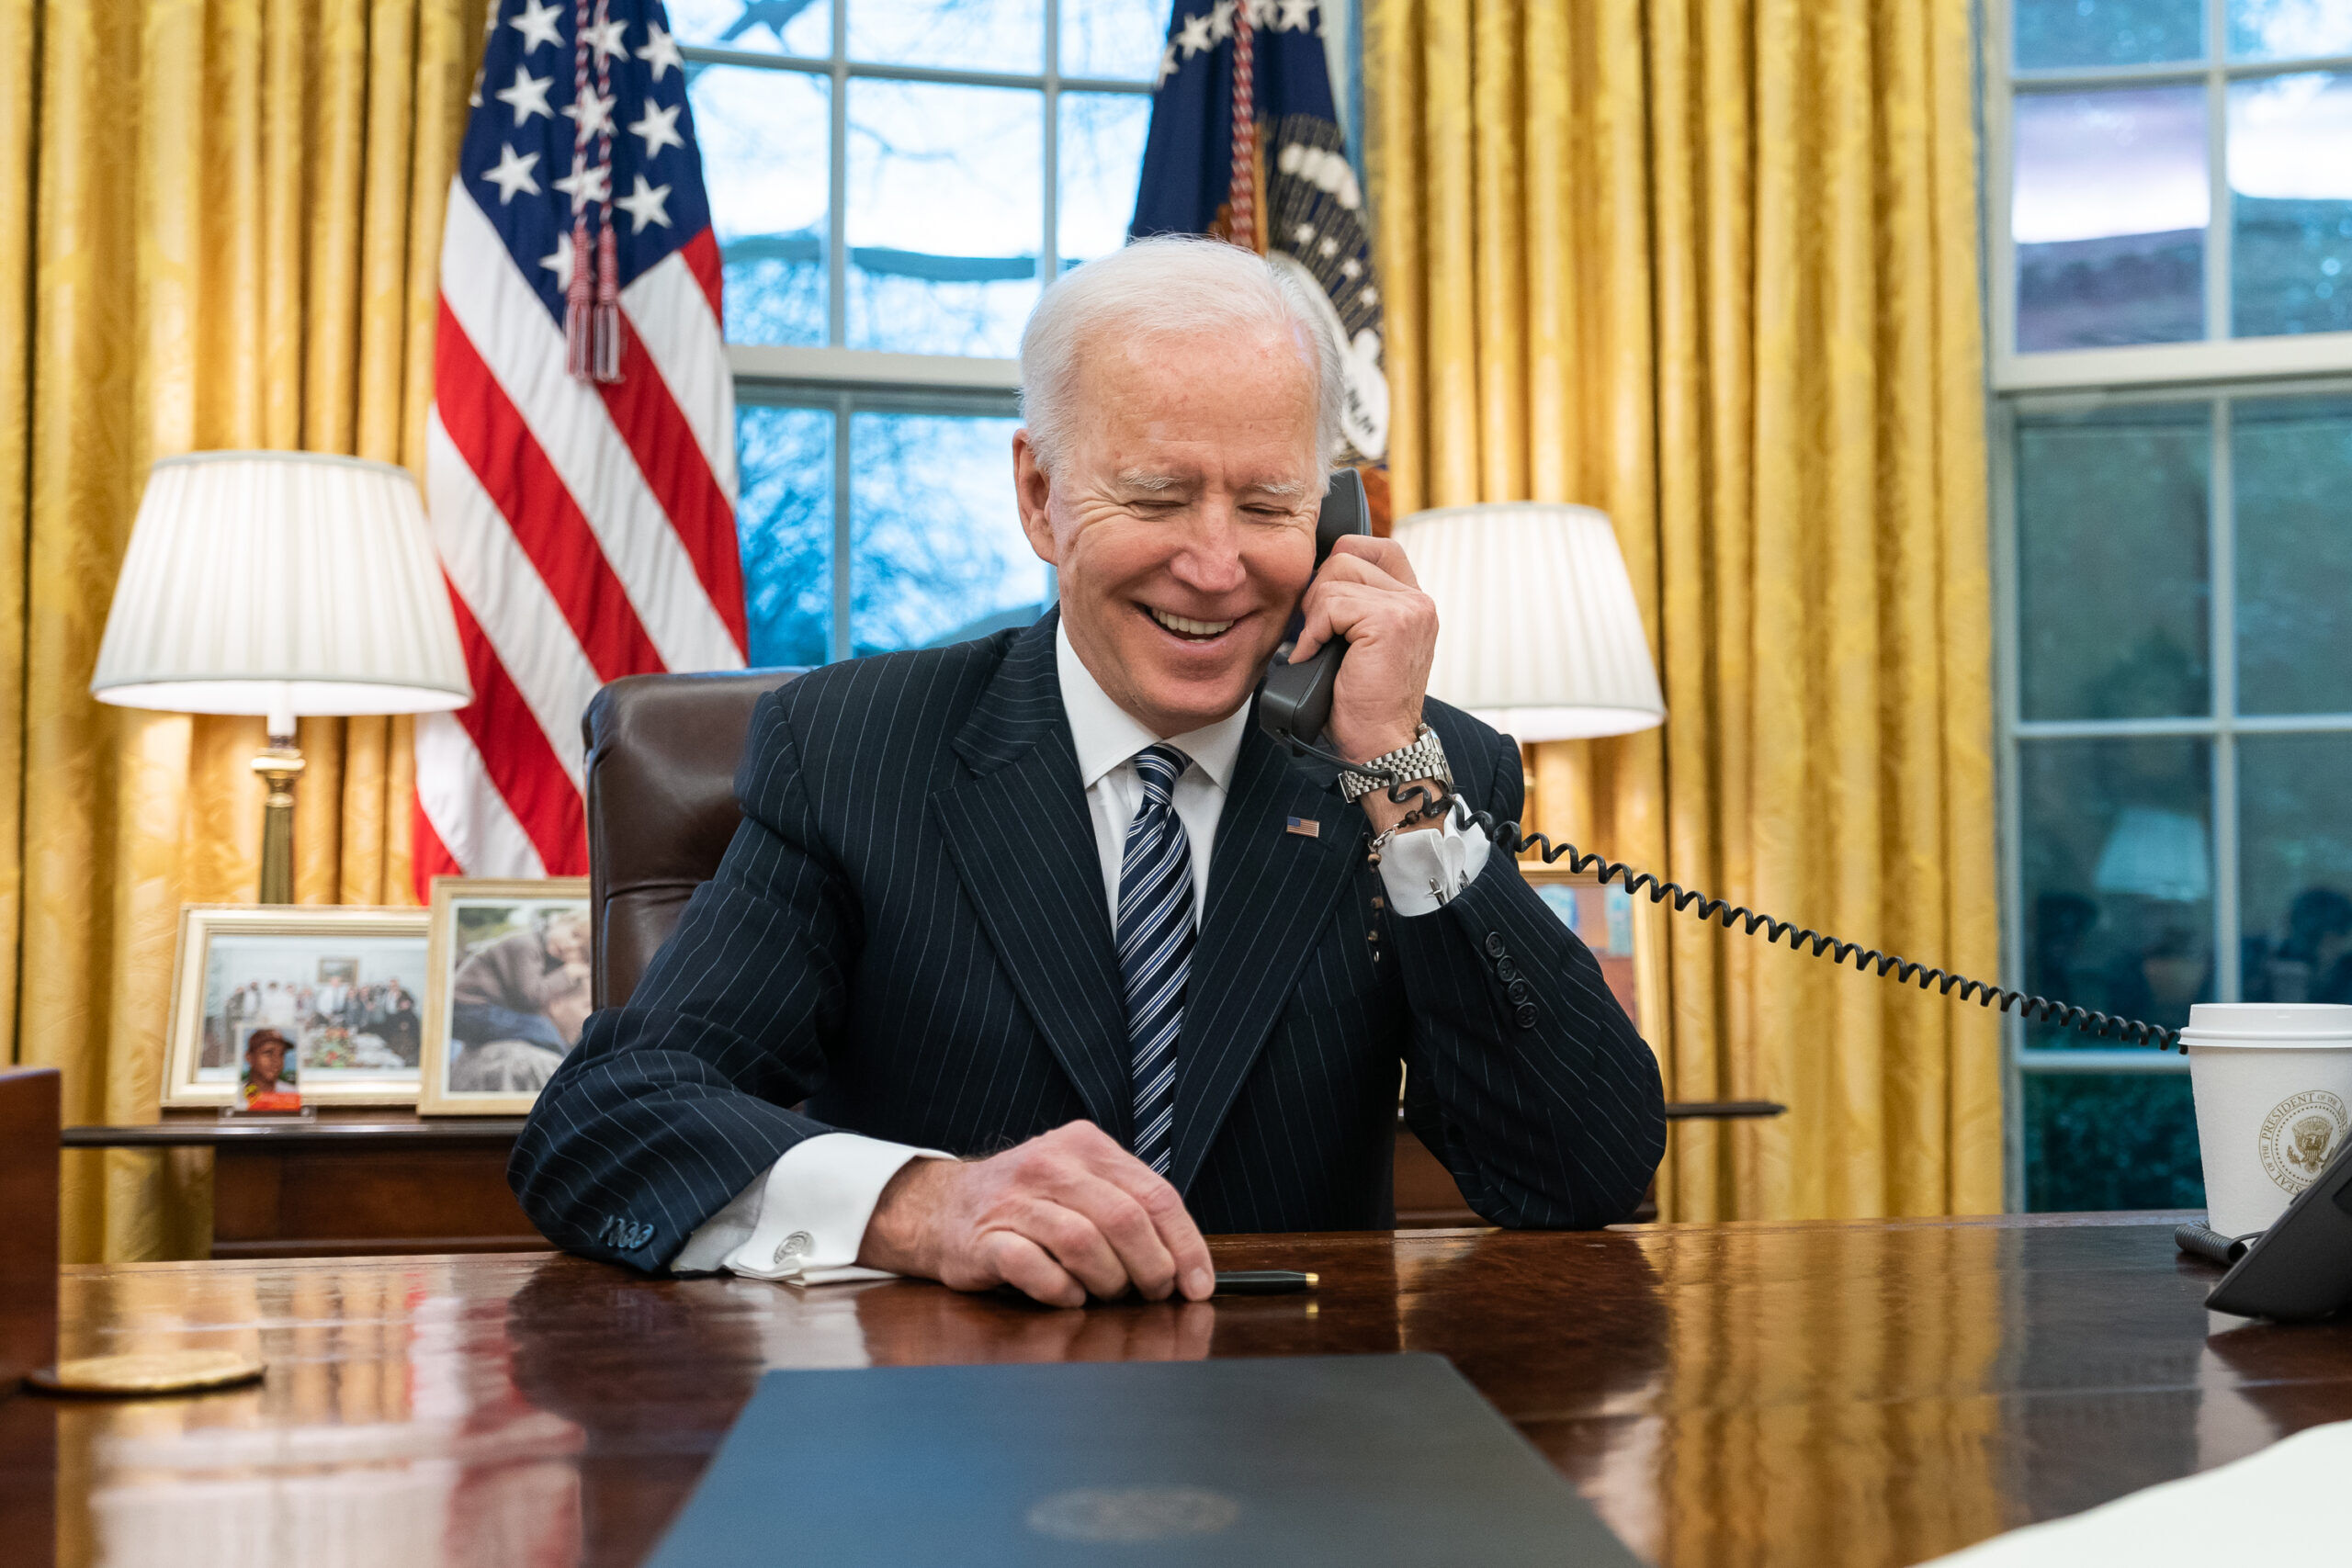 President Joe Biden talks on the phone with Katherine Tai in the Oval Office of the White House Thursday, March 18, 2021, to congratulate her on her confirmation as U.S. Trade Representative. (Official White House Photo by Adam Schultz)